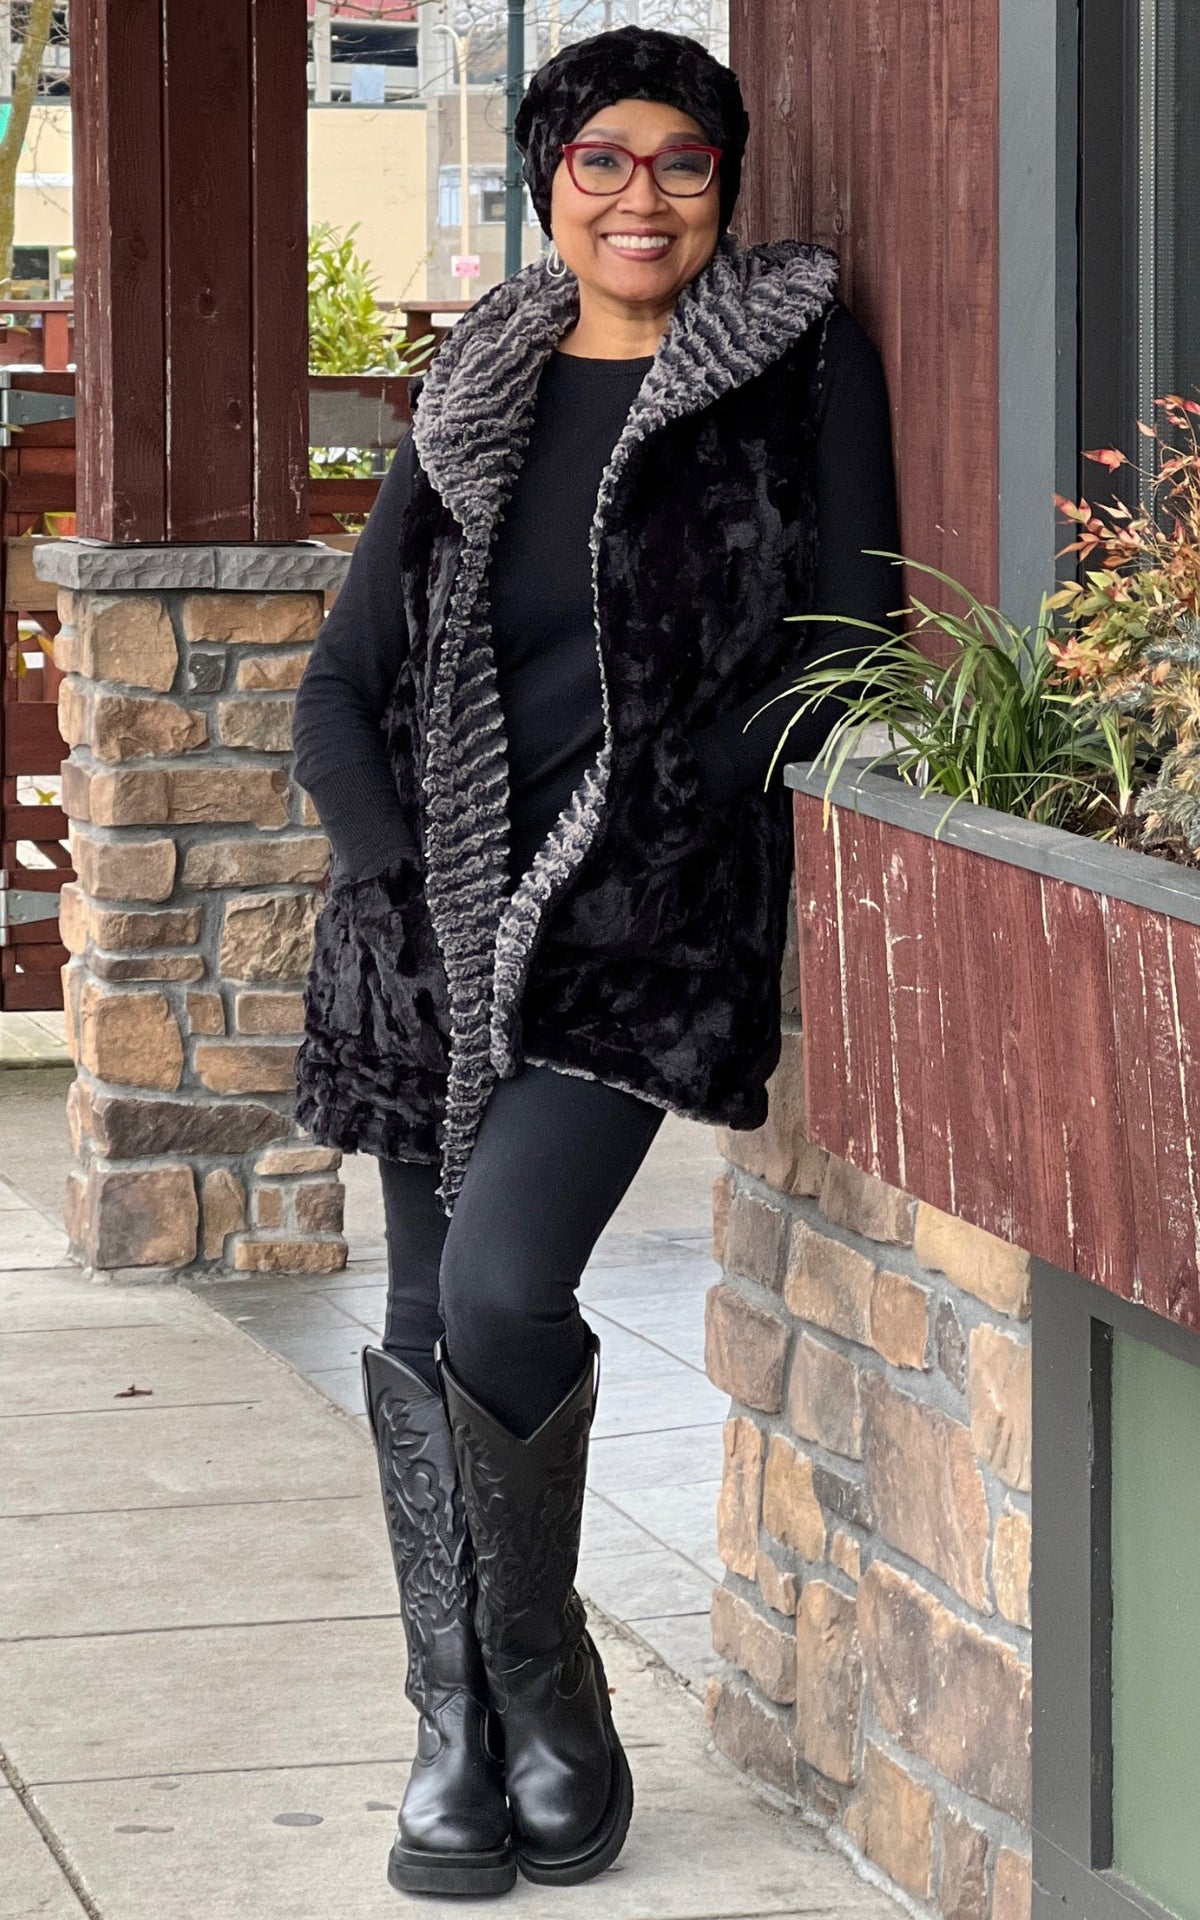 Woman modeling the Oversized Hooded Vest in Cuddly Black faux fur with the reverse color Desert Sand Charcoal. Handmade by Pandemonium Seattle.